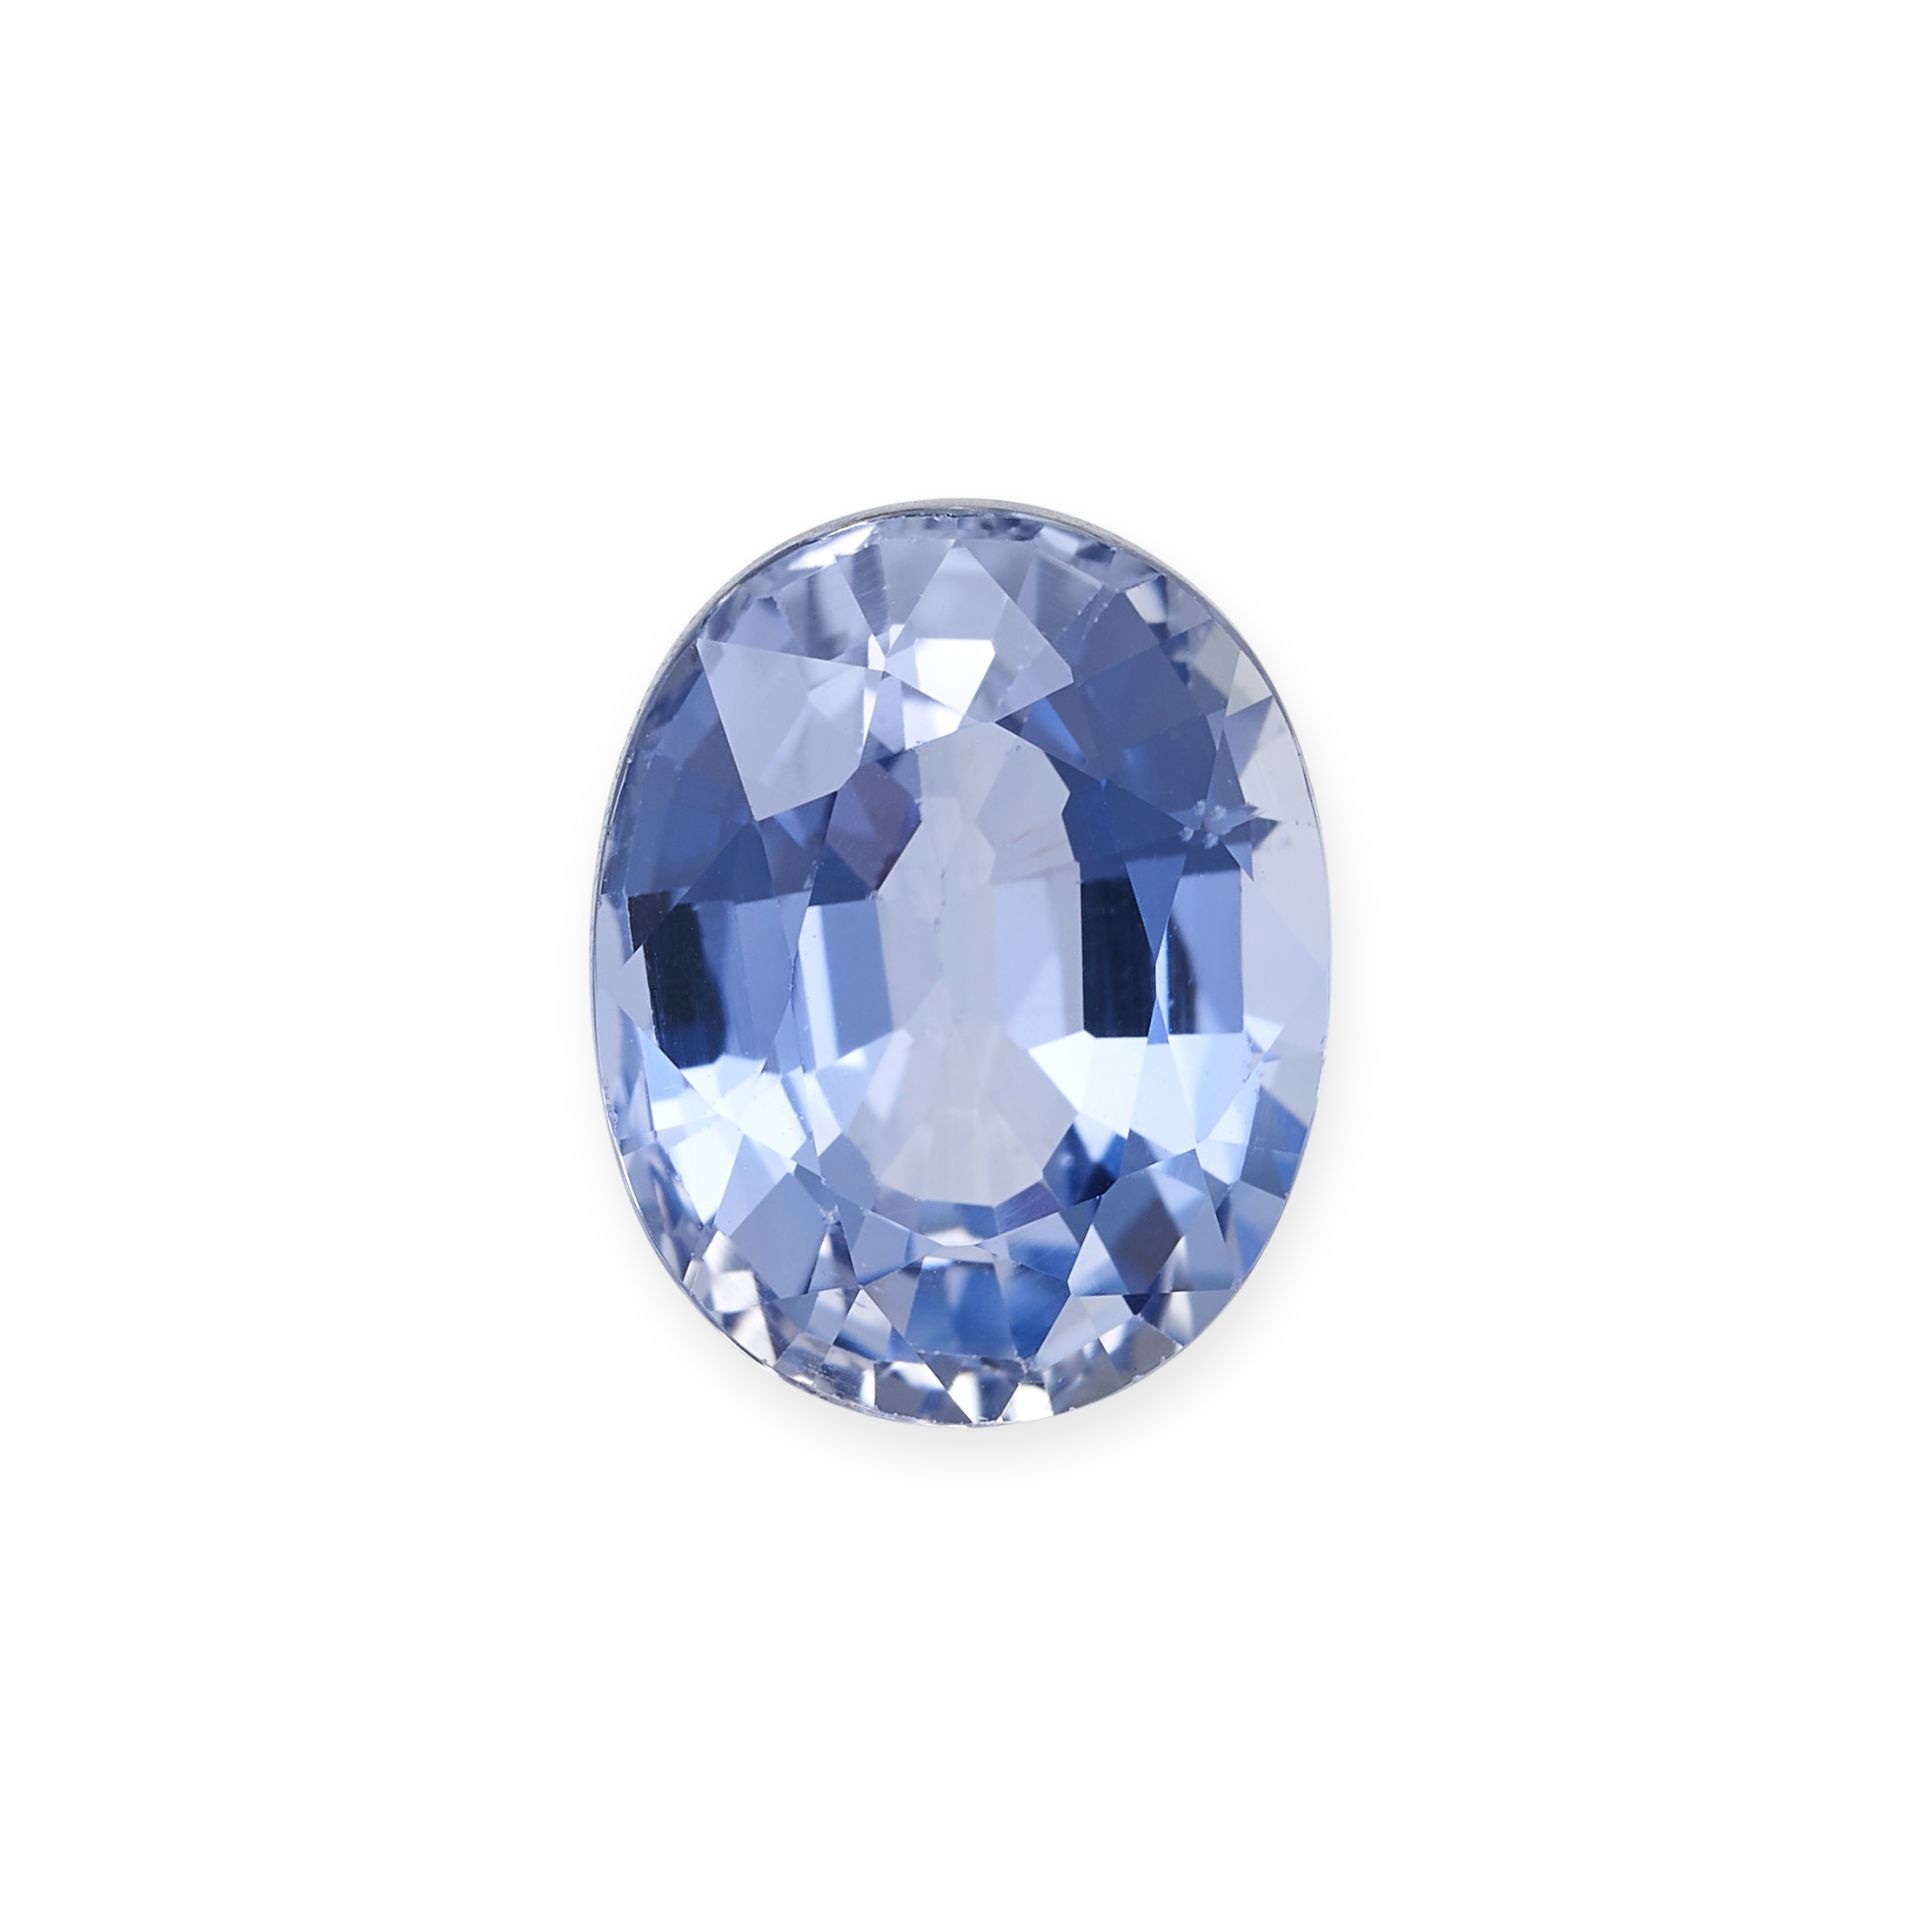 AN UNMOUNTED SYNTHETIC SAPPHIRE oval cut, 4.13 carats.